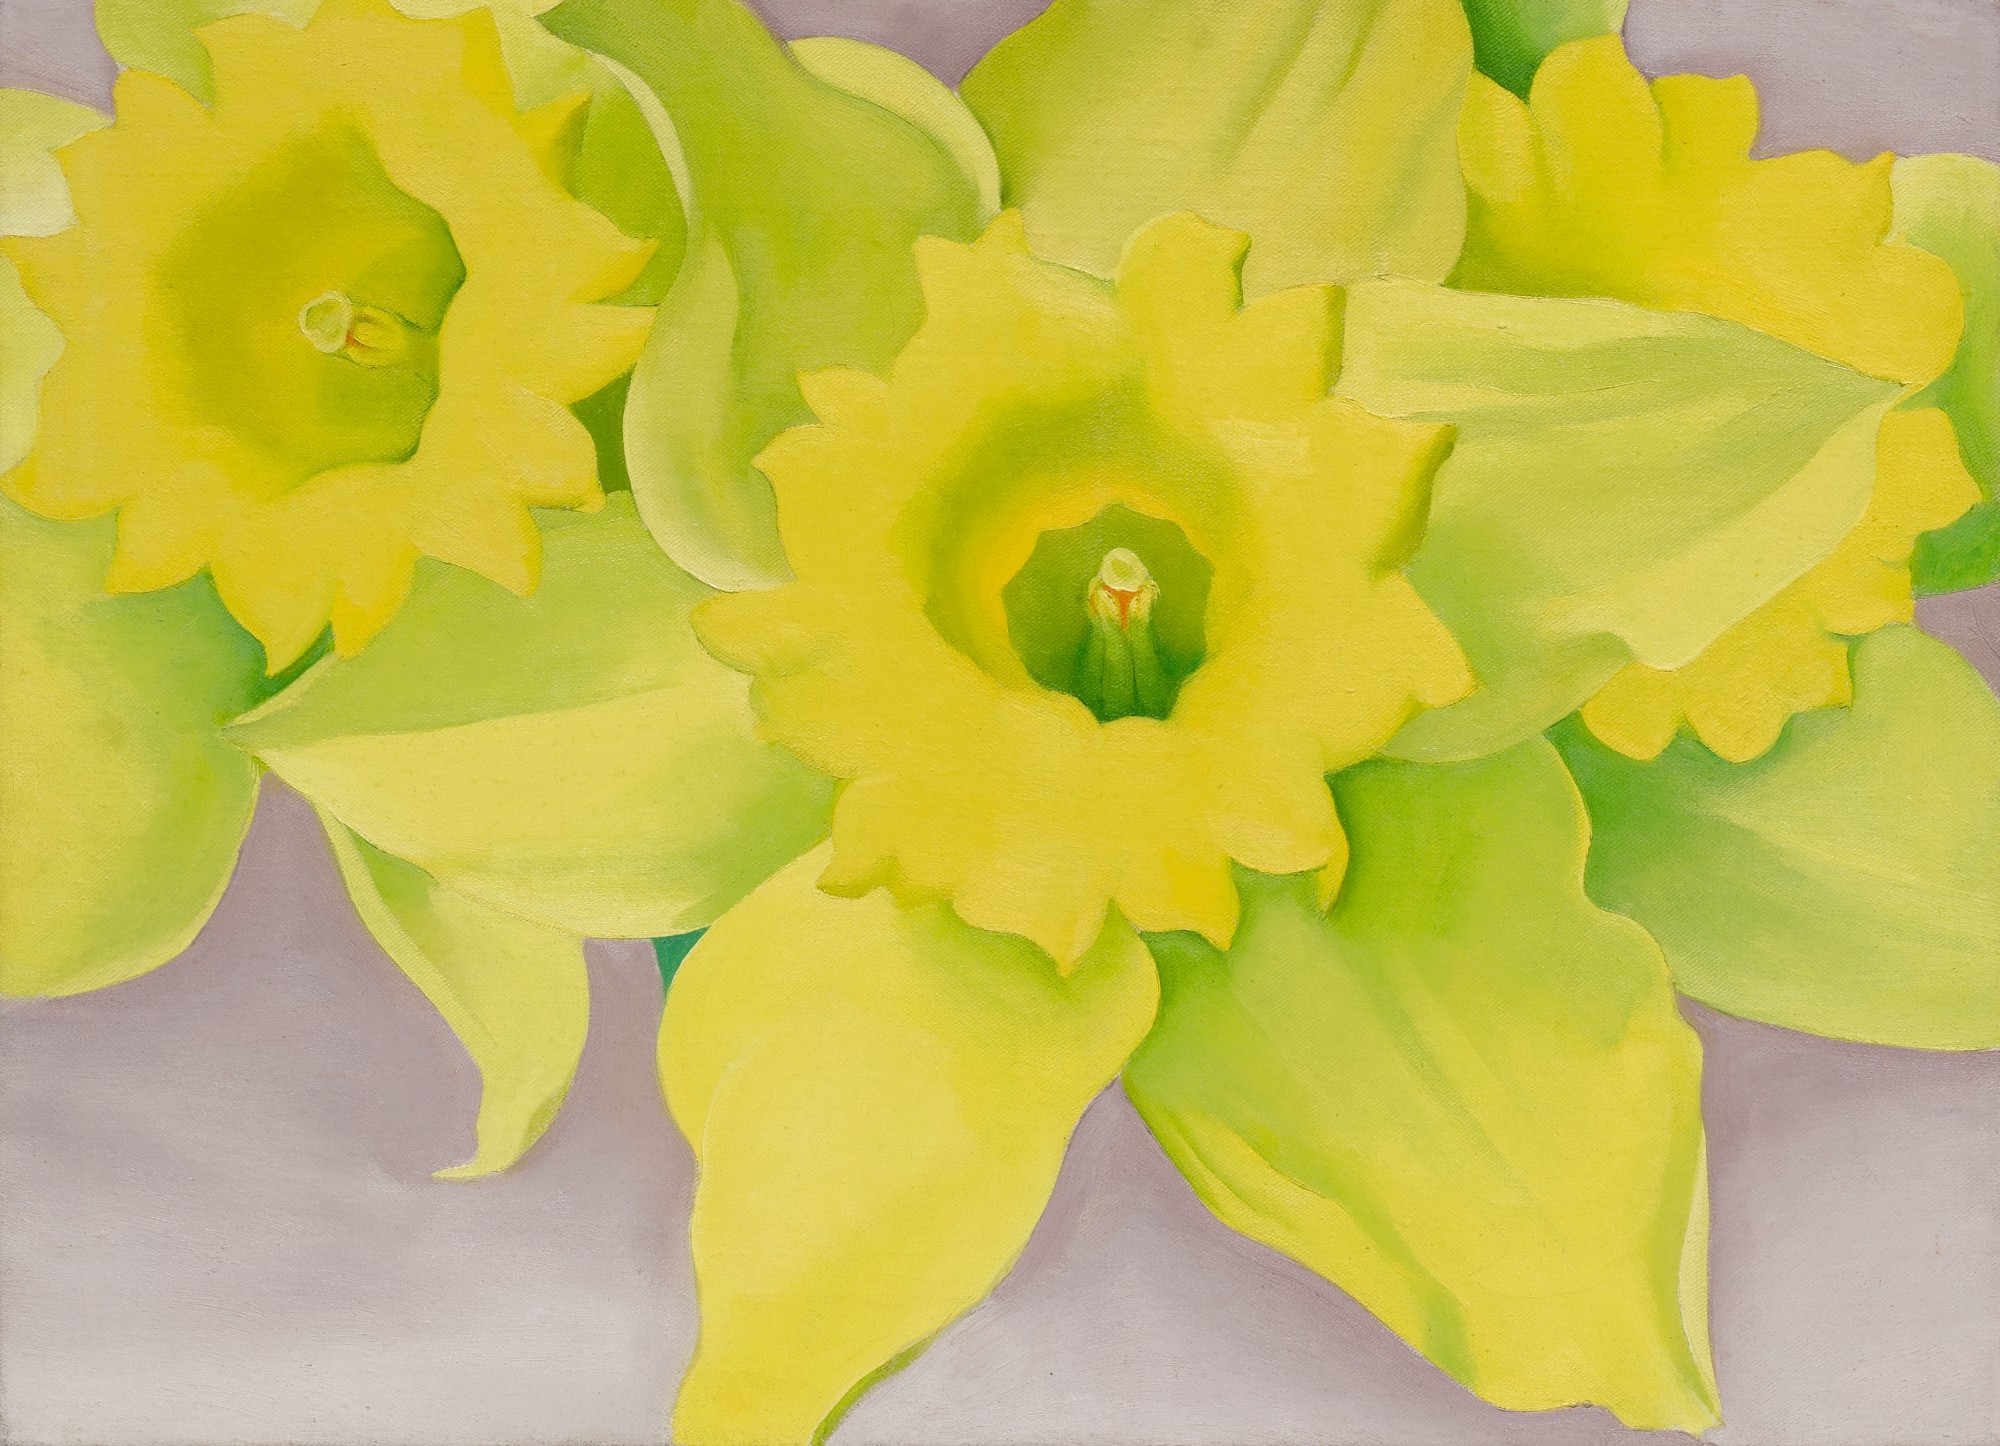 JONQUILS I by Georgia O'Keeffe, Painted in 1936